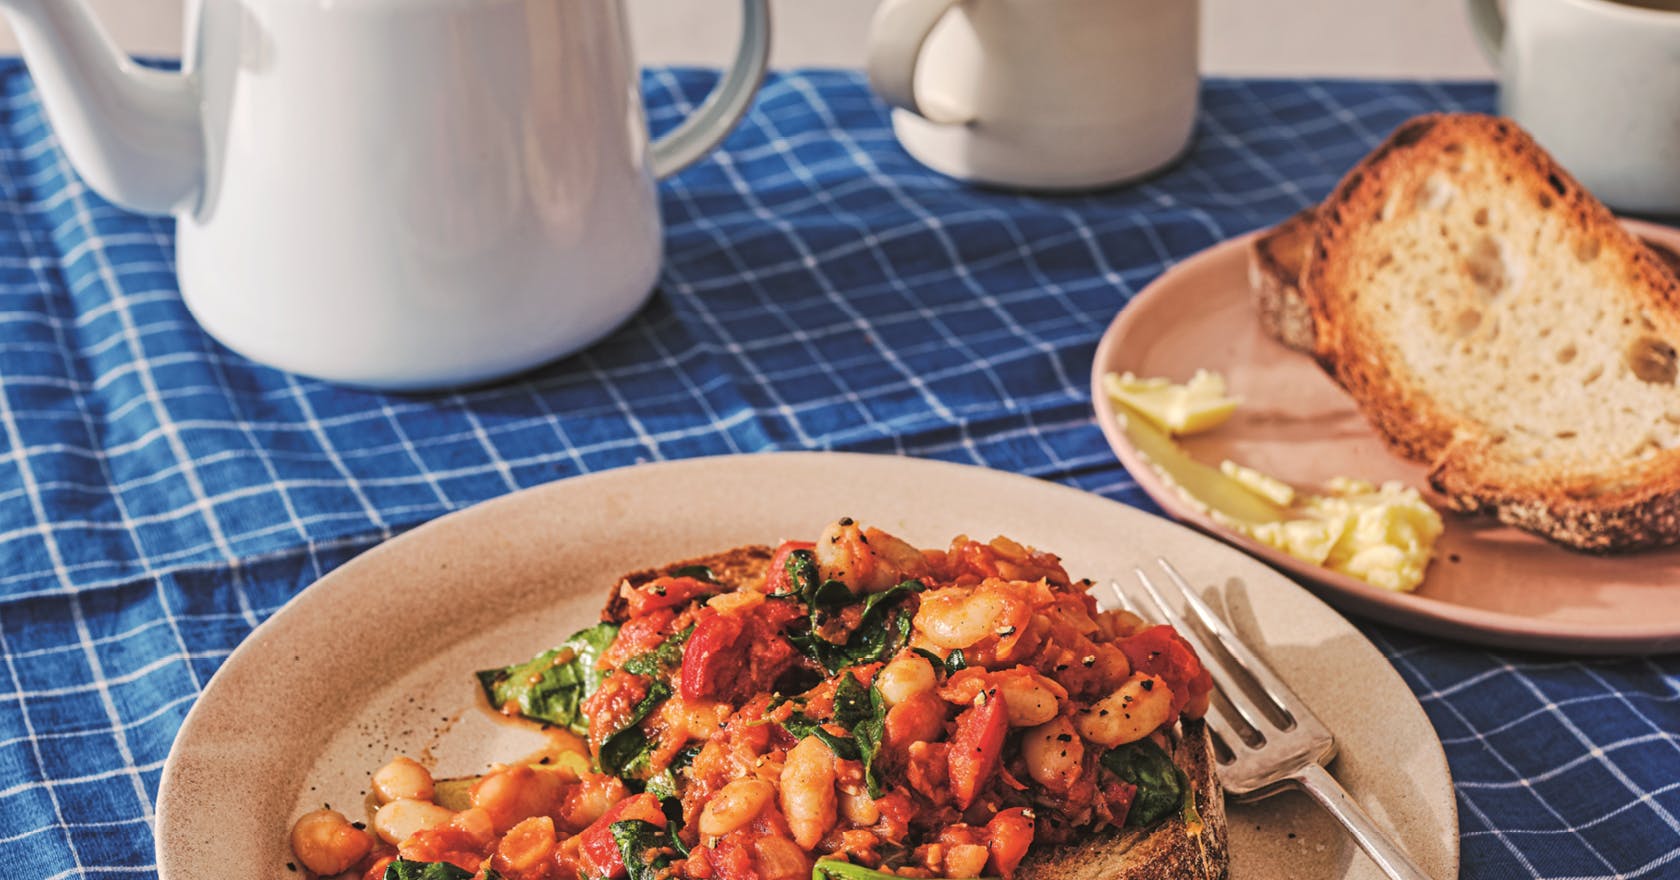 This baked beans recipe is the ultimate gut health boosting lunch